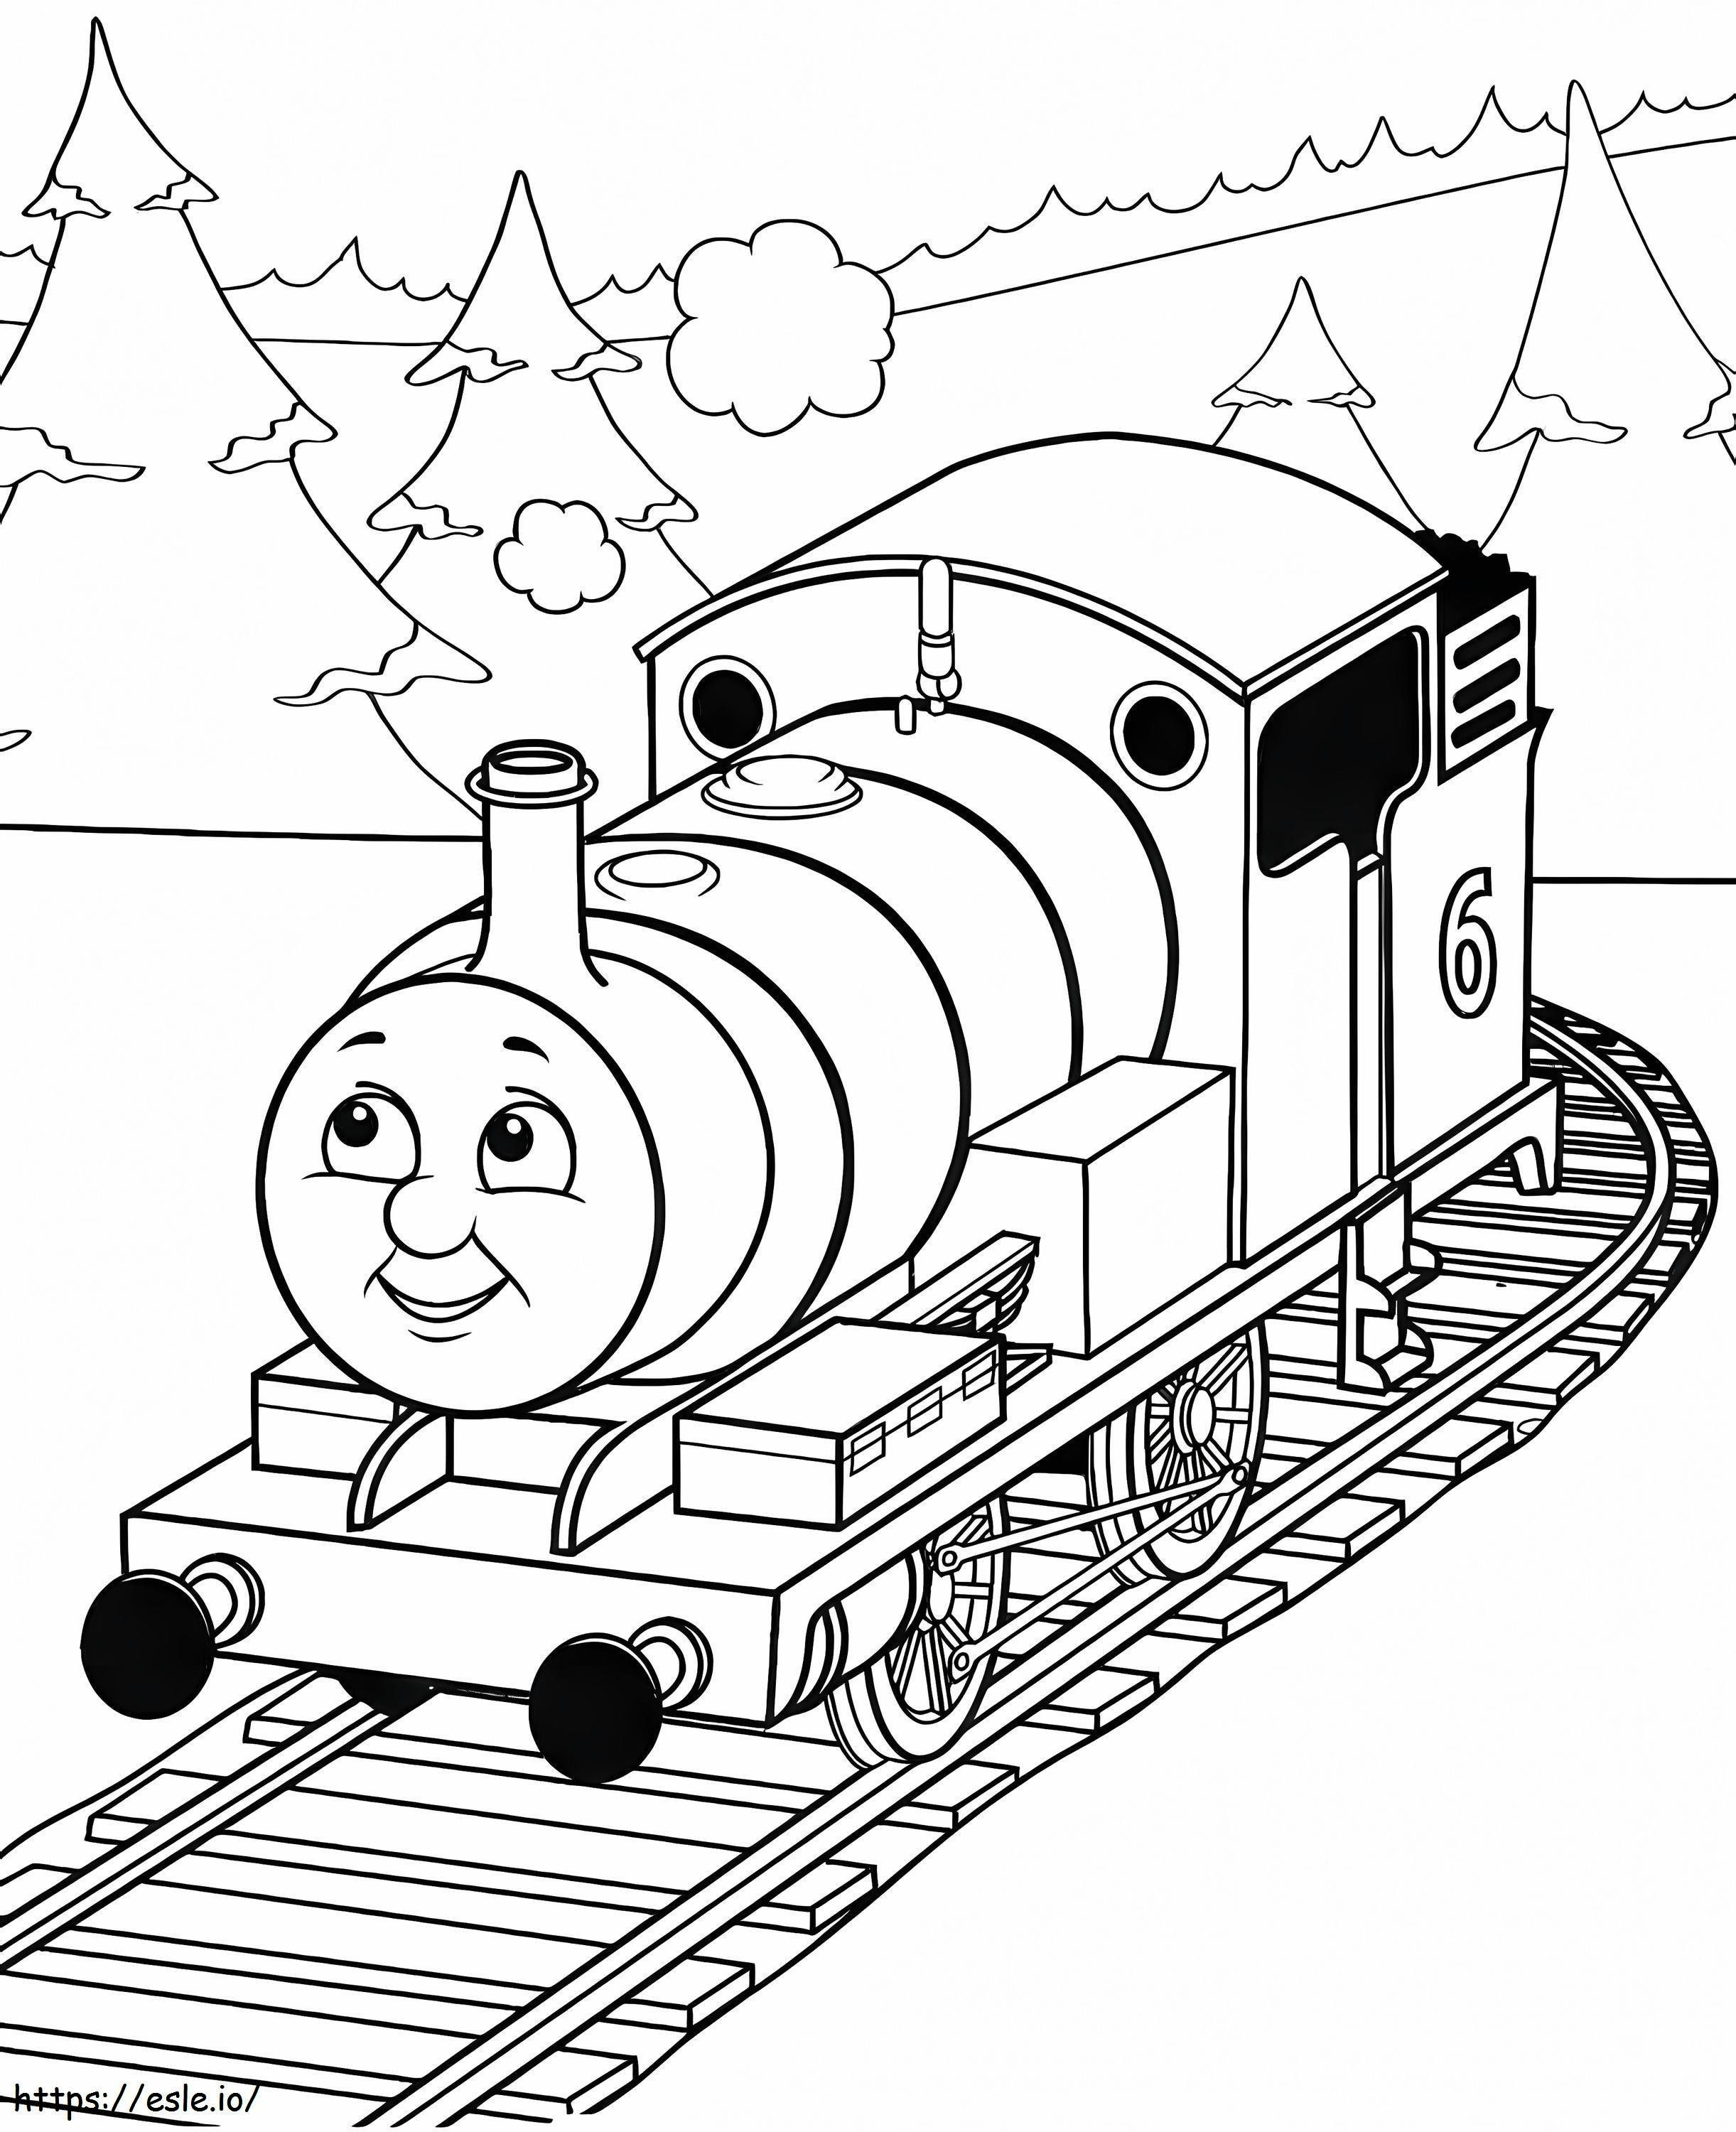 Thomas The Train Coloring Page 5 coloring page